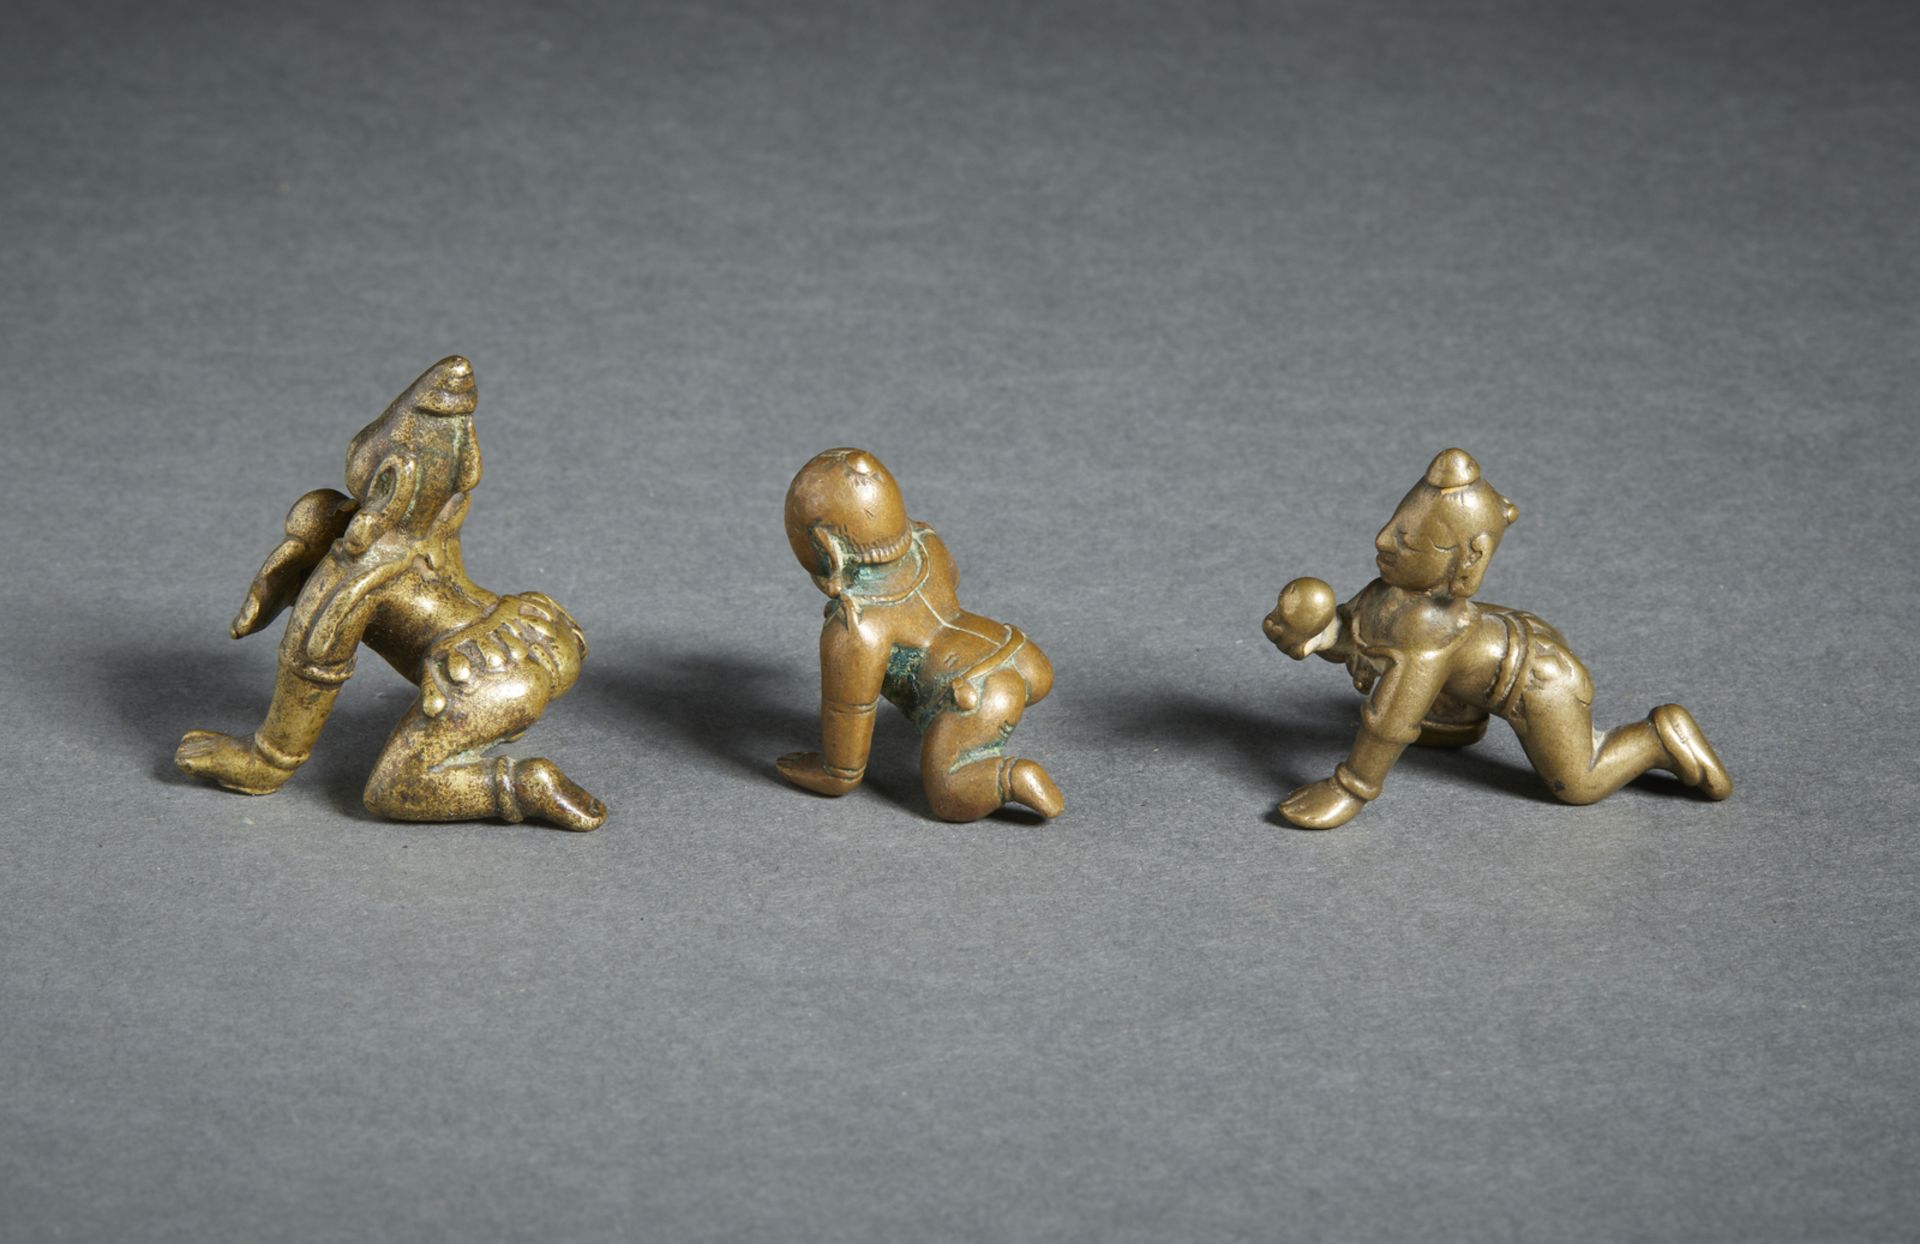 A group of three copper alloy Balakrishna Central and Southern India, 18th century Altre misure: 4x3 - Image 2 of 2